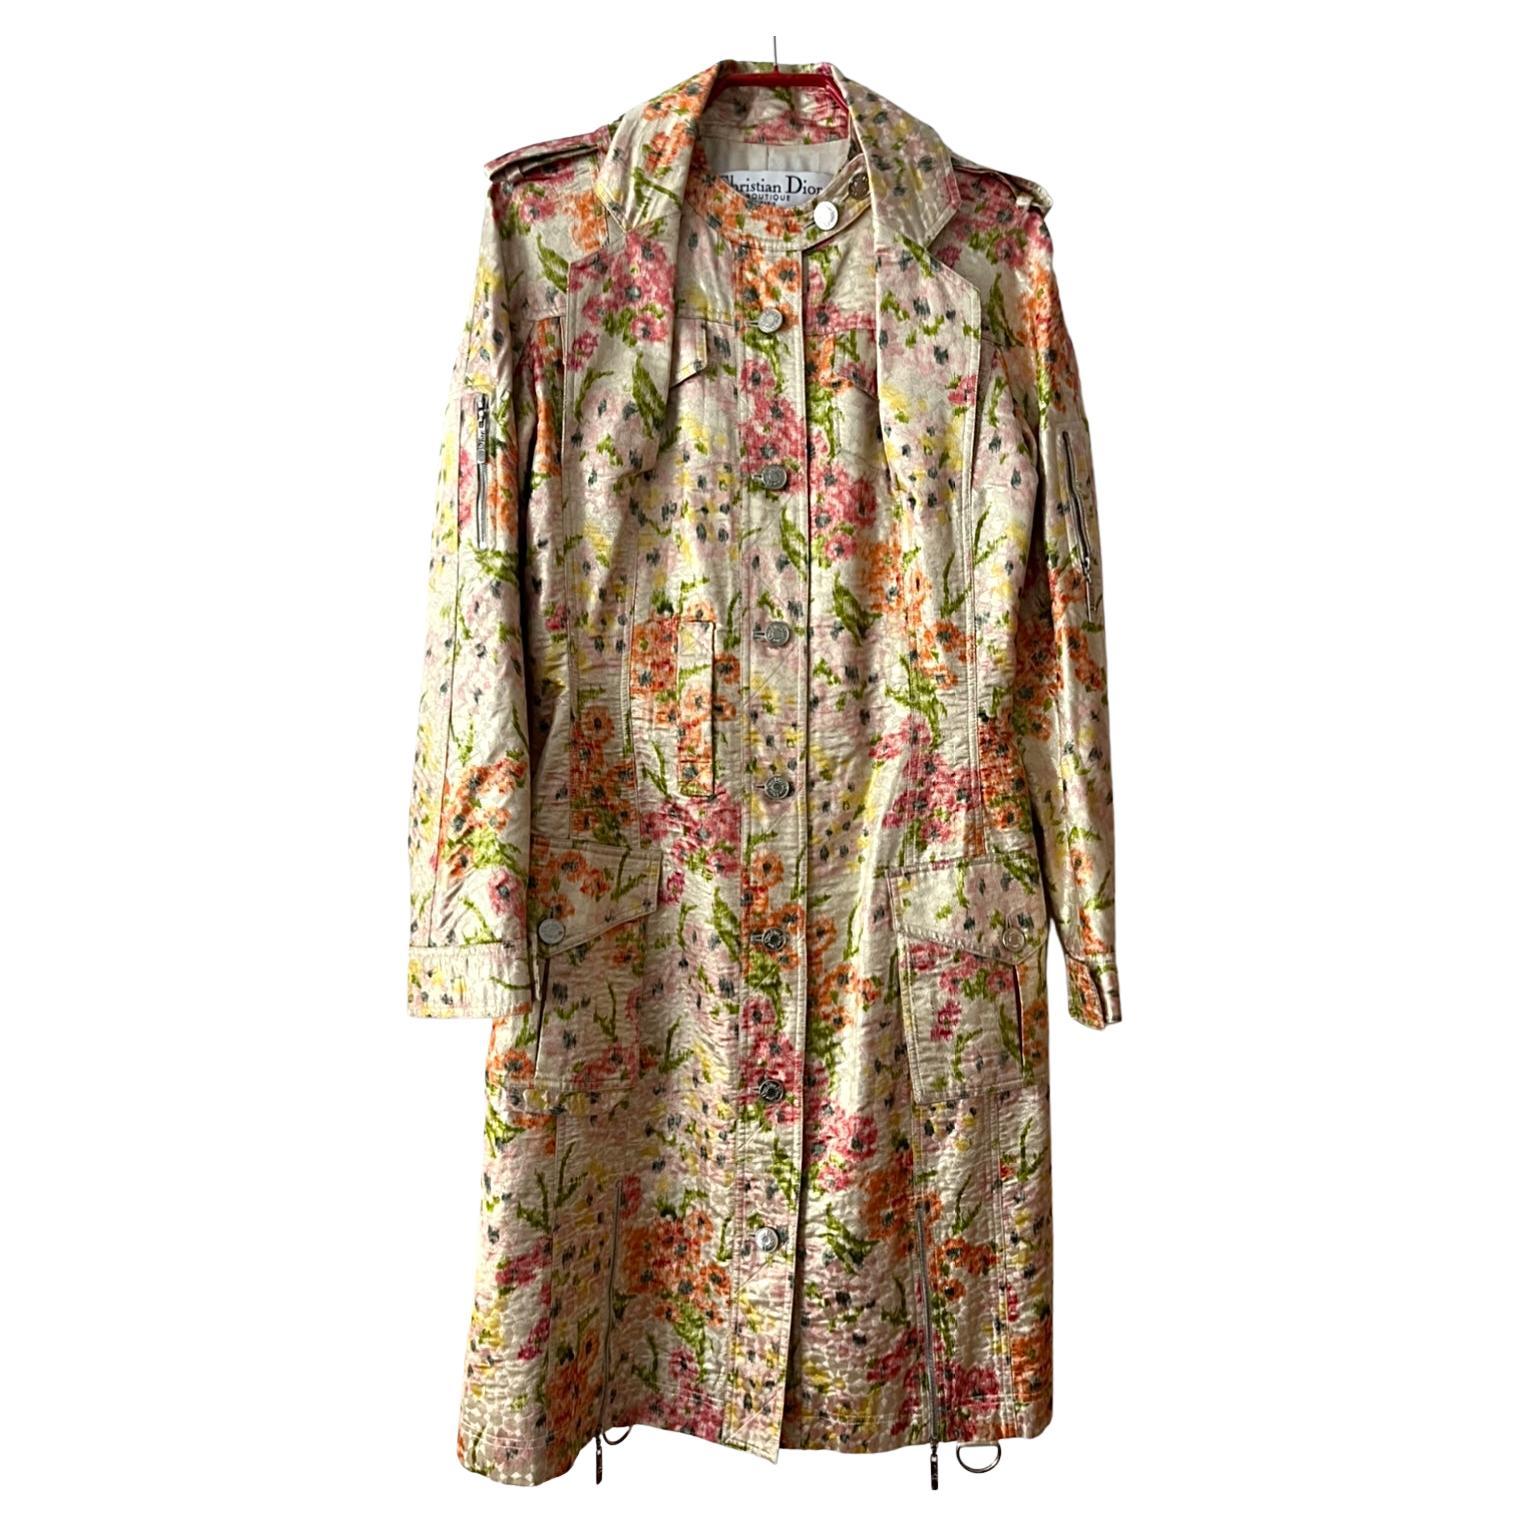 2005 Spring Christian Dior Silk Trench Coat by John Galliano in a very good vintage condition. Wonderful floral print. This retrospective simply became retro—a mish-mash mix of old references masquerading as something new.
89% Silk
11%